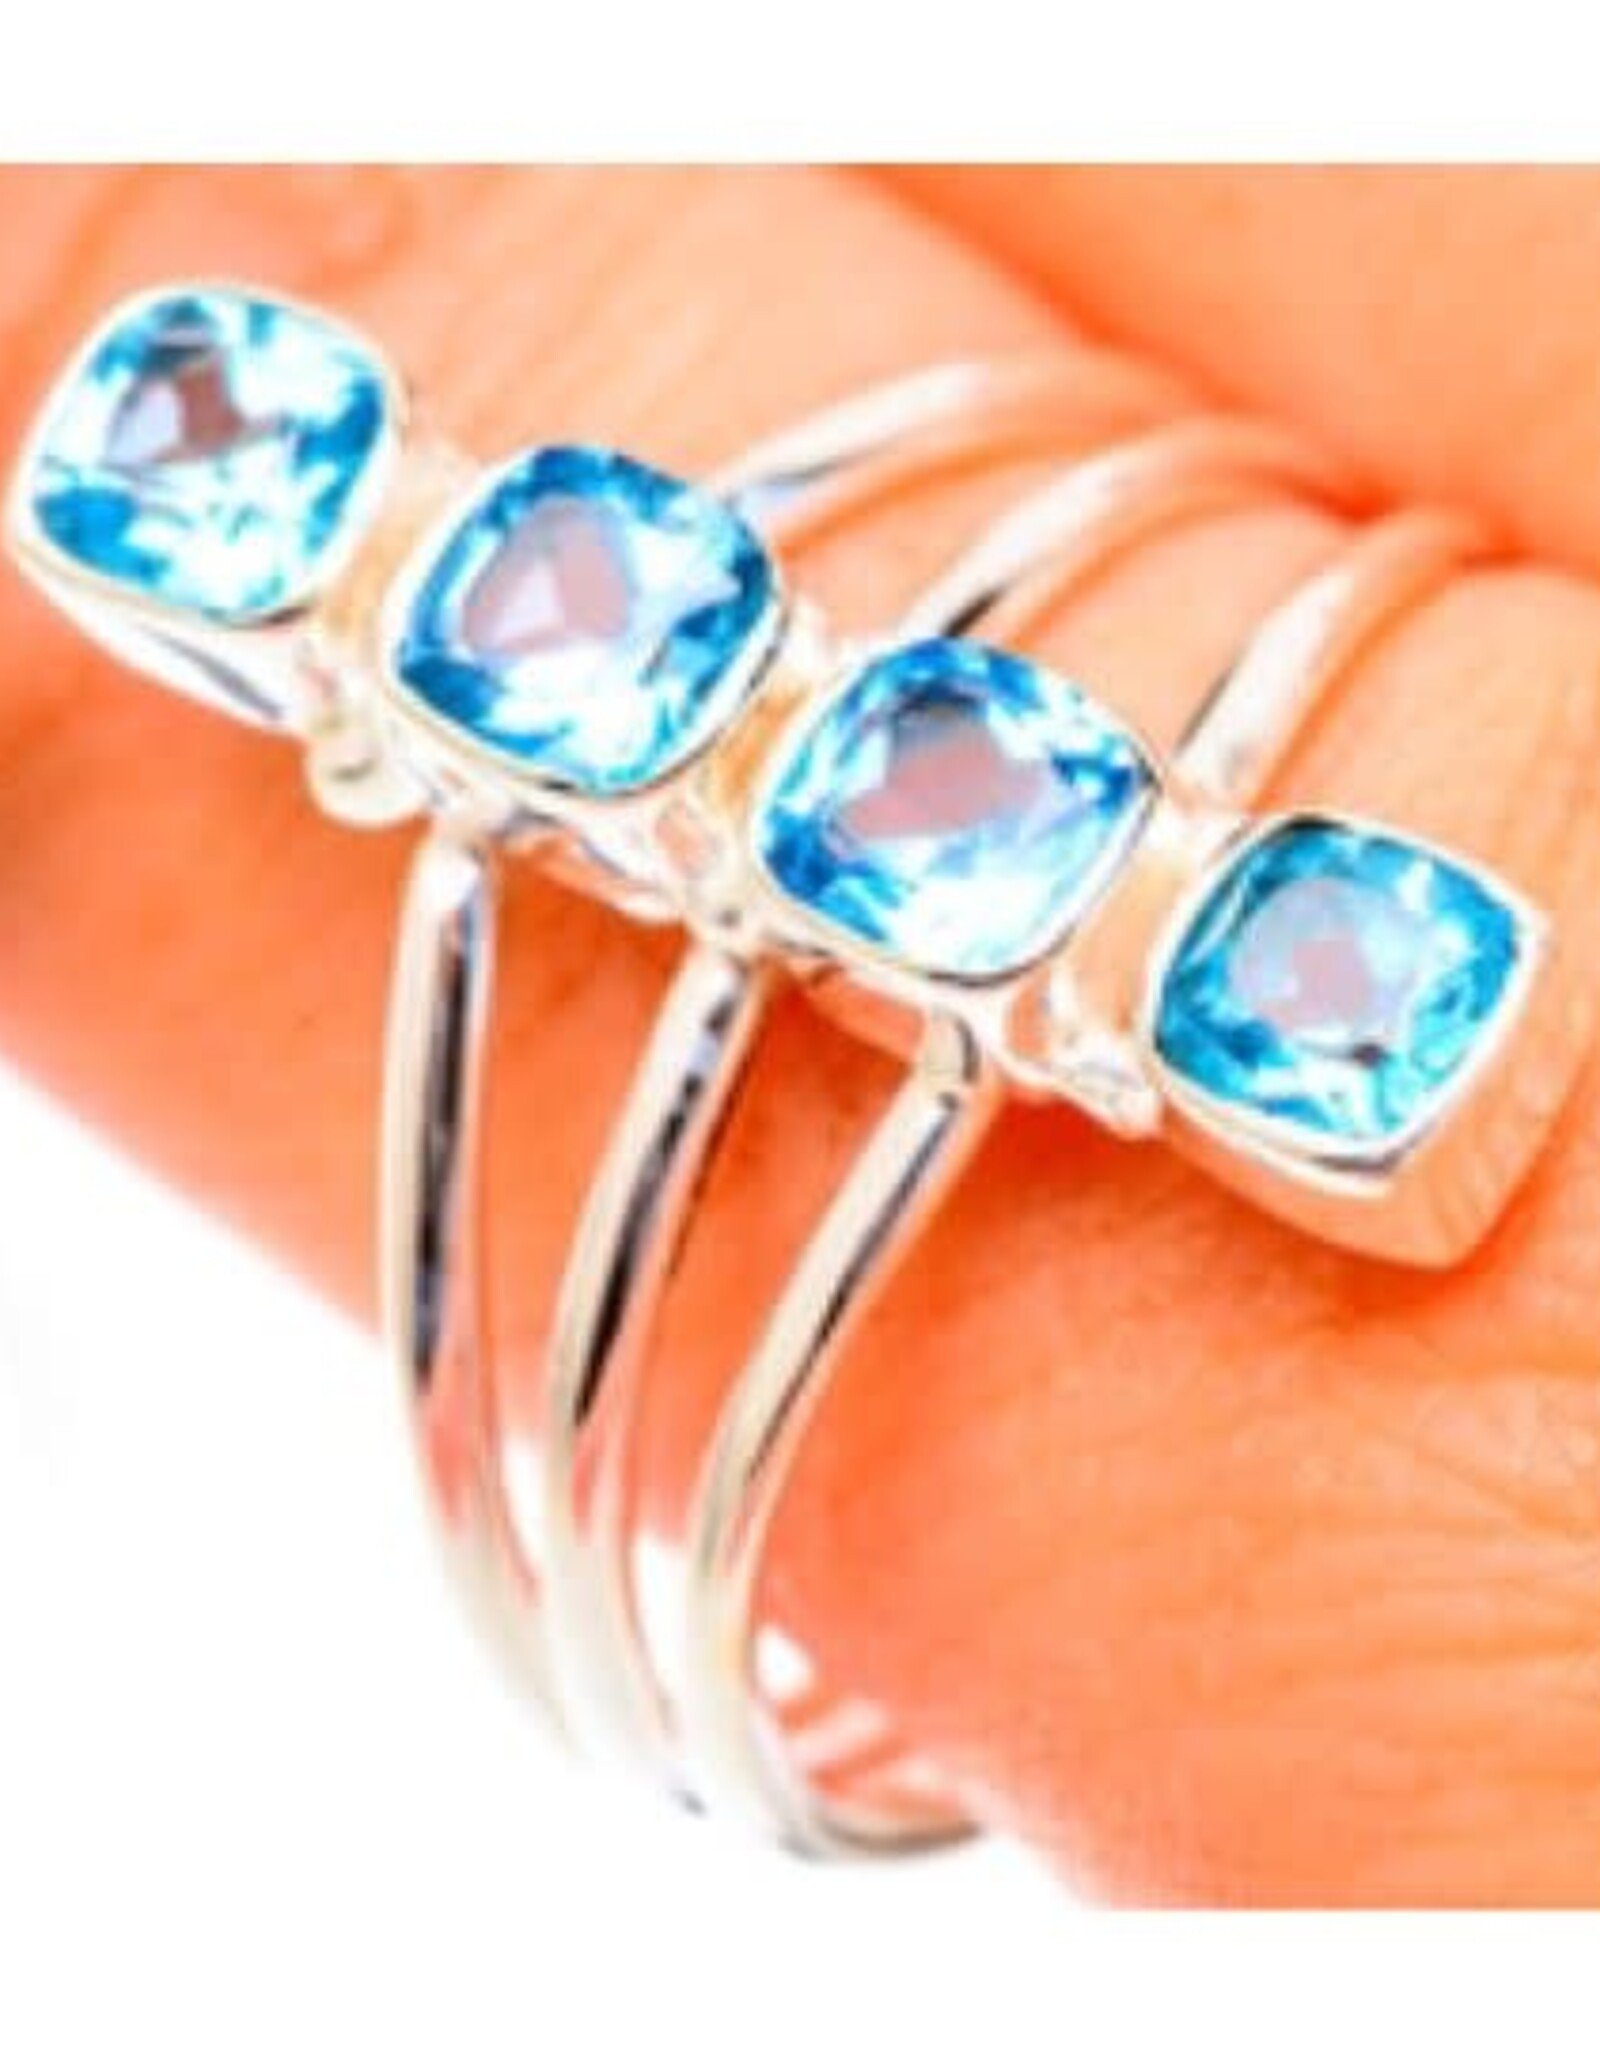 Blue Topaz Sterling Silver Ring Size 10.25